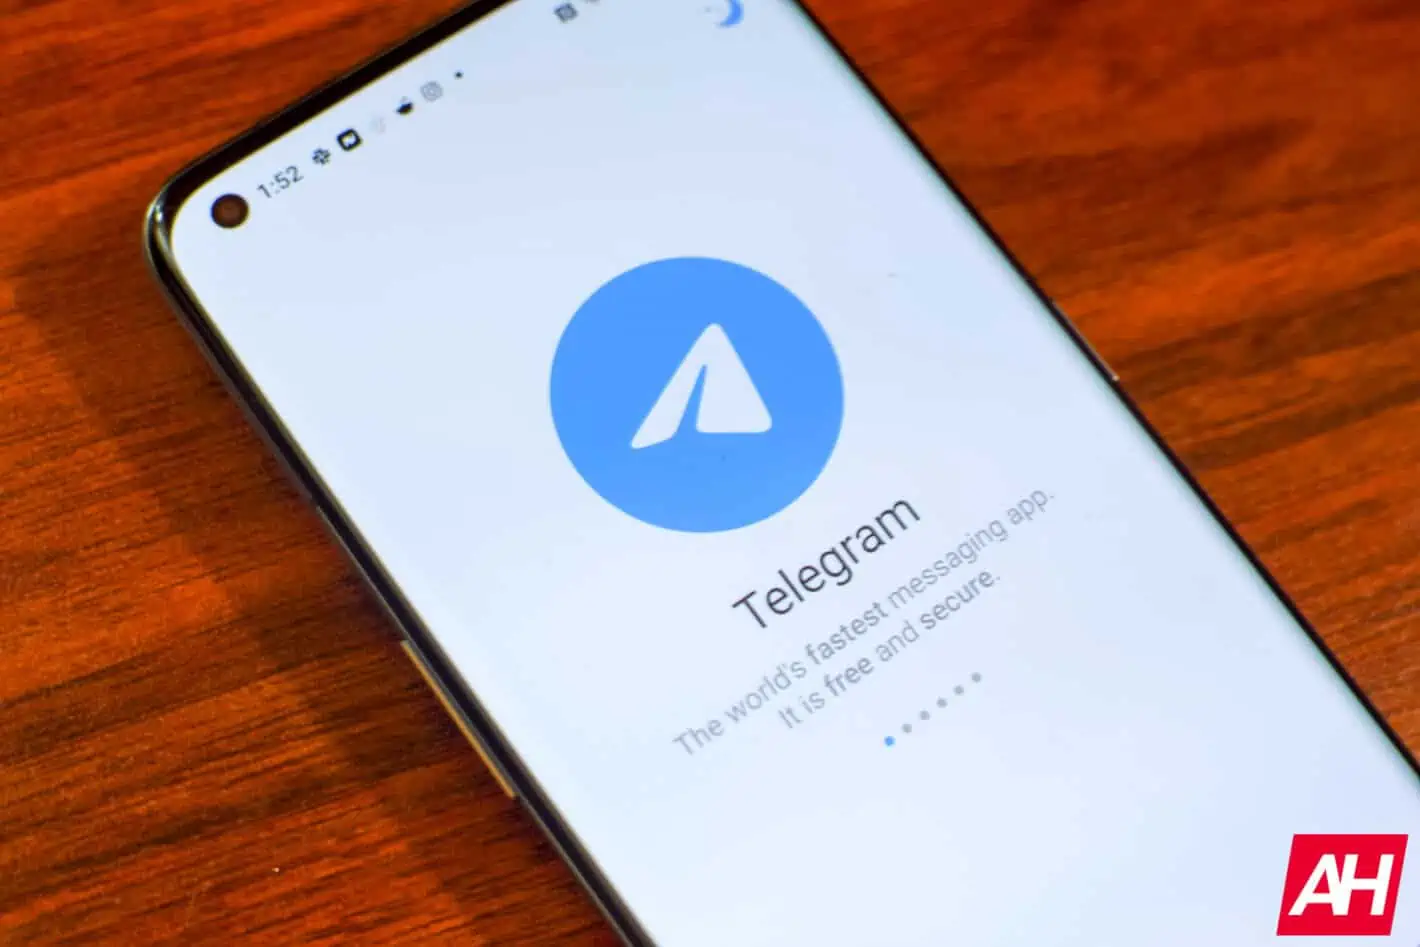 Featured image for Telegram was almost suspended in Spain due to copyright infringement